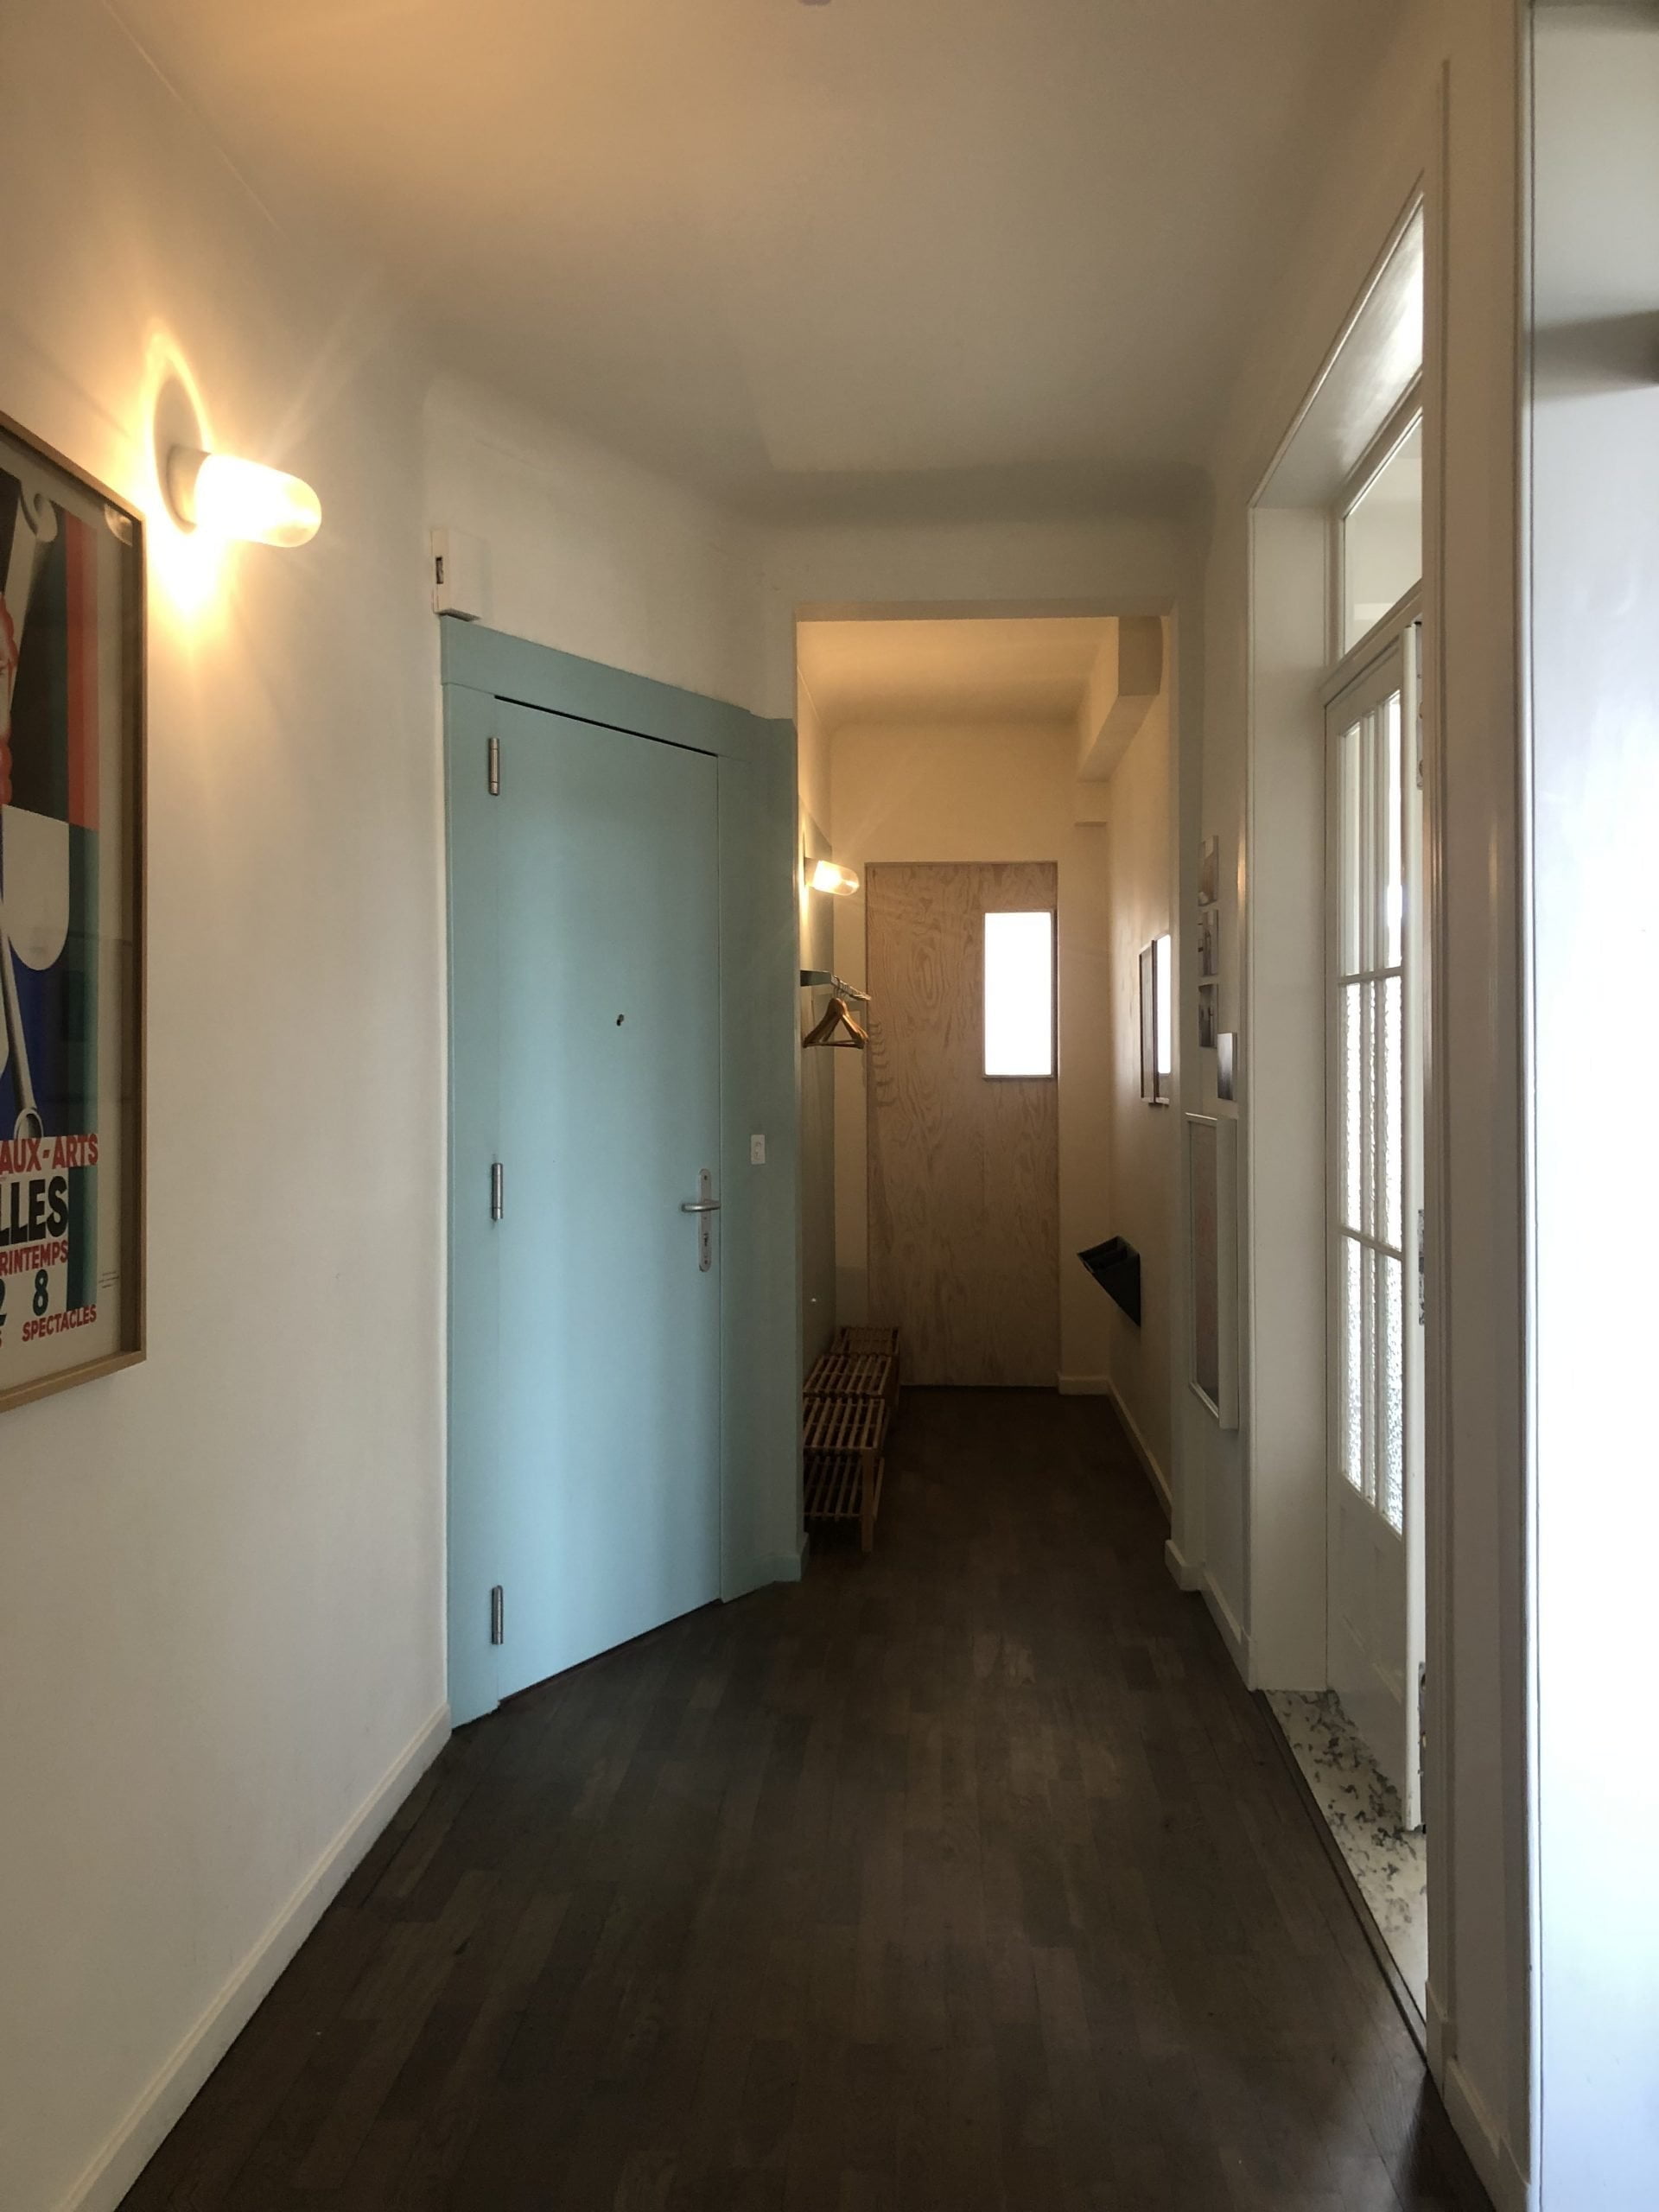 Helenalei - Apartment in Antwerp for expats